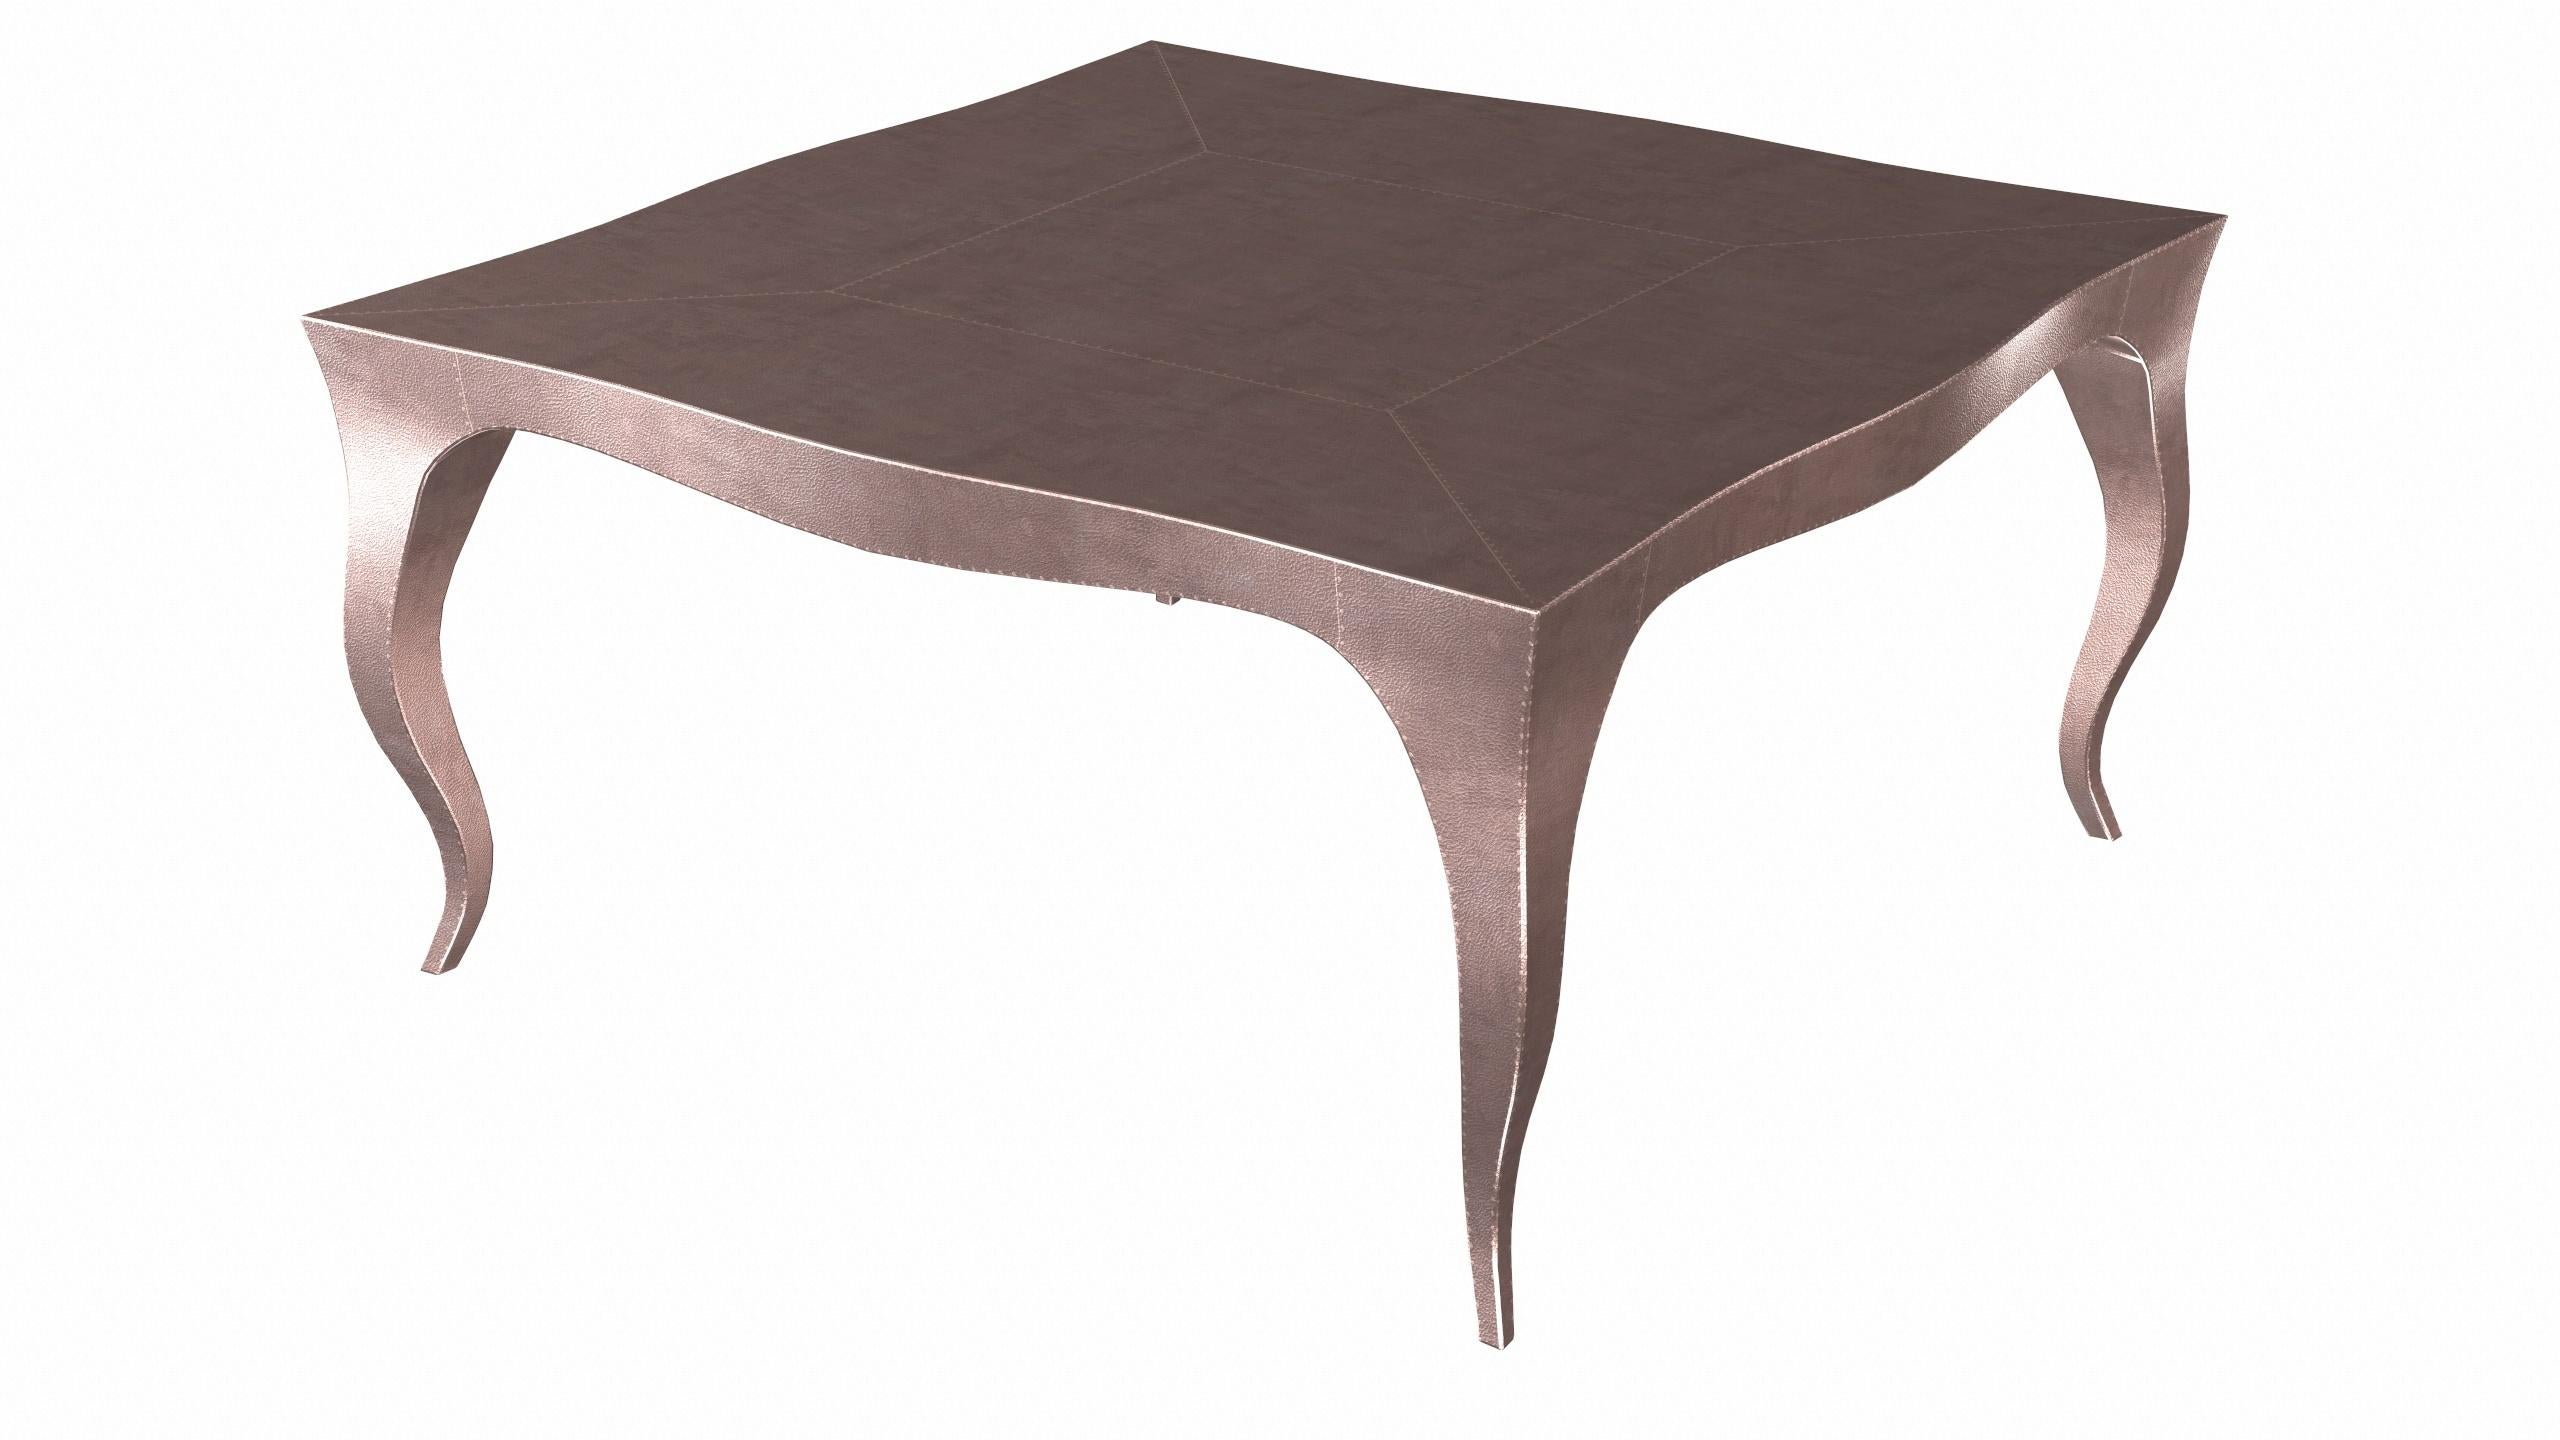 Contemporary Louise Art Deco Coffee Tables Fine Hammered Copper 18.5x18.5x10 inch For Sale